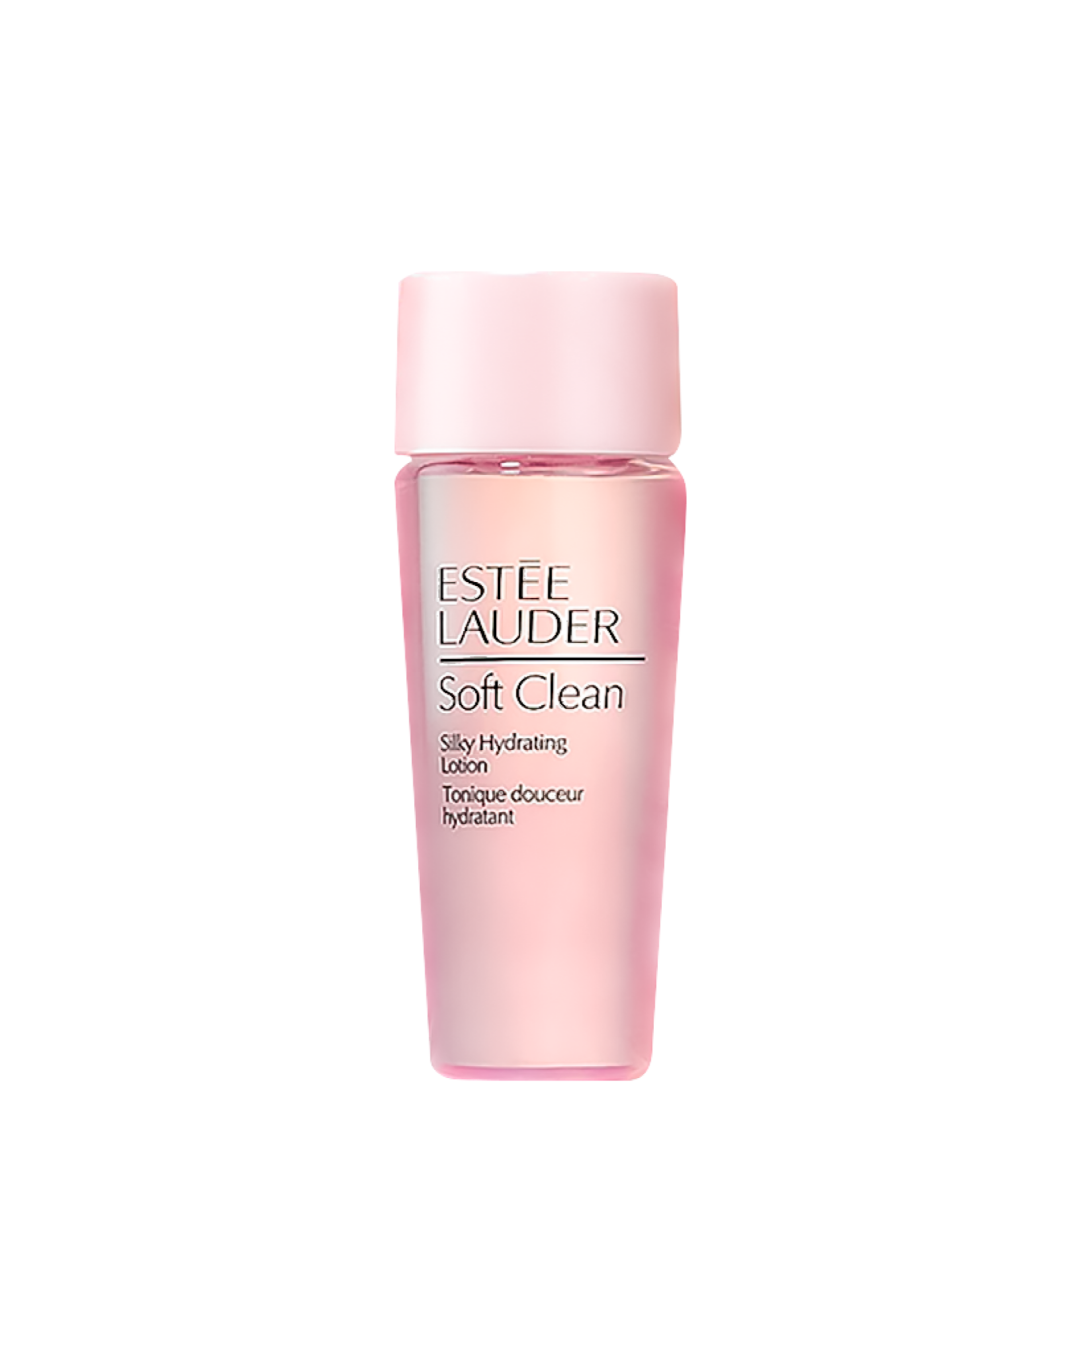 Estee Lauder Soft Clean Silky Hydrating Lotion (50ml) - Best Buy World Philippines